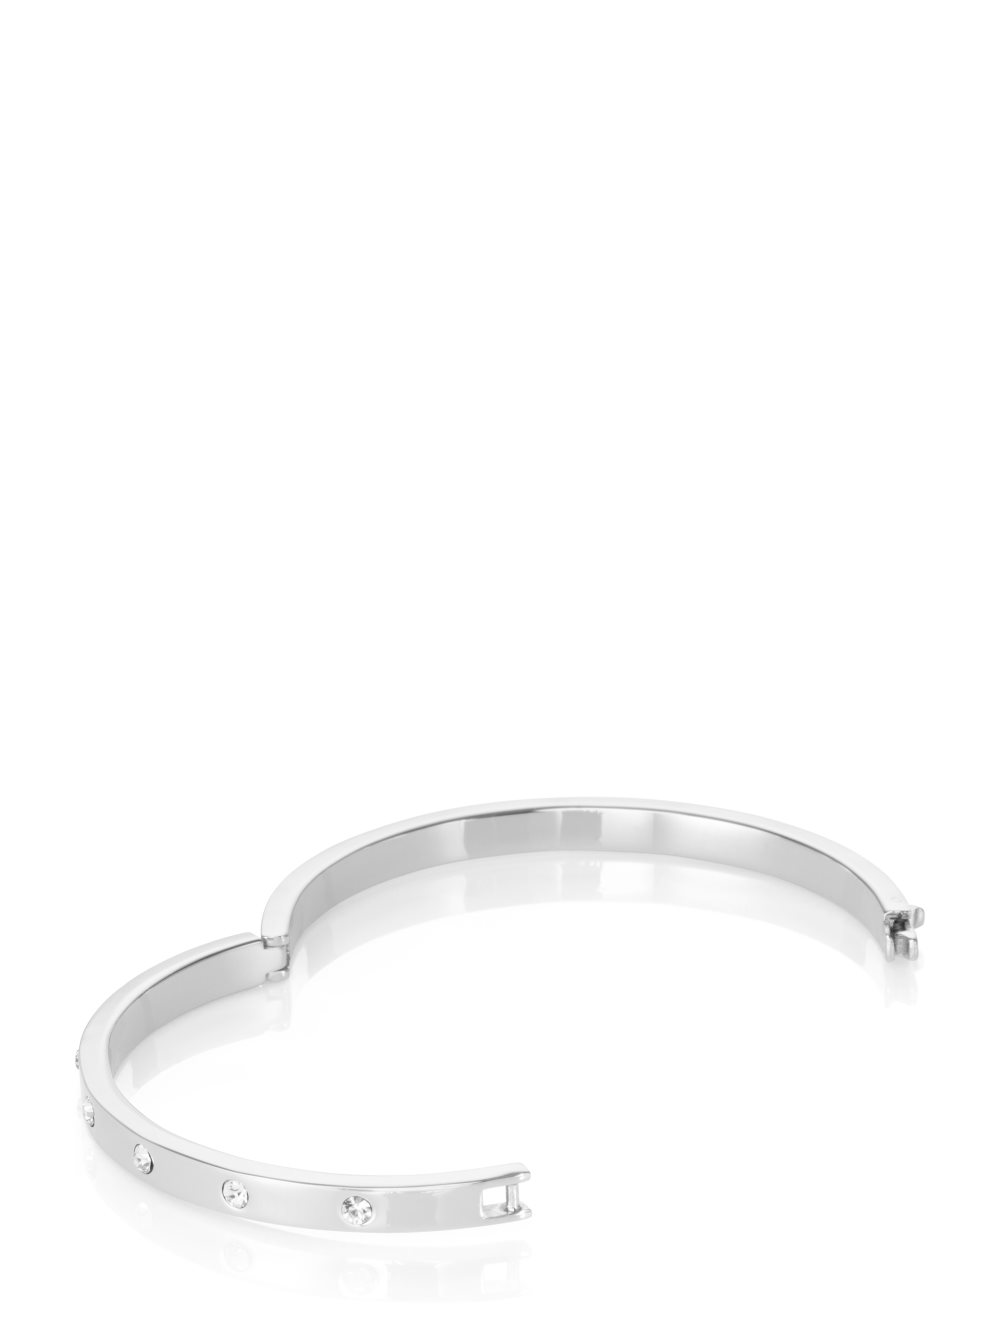 Women's clear/silver set in stone stone hinged bangle | Kate Spade